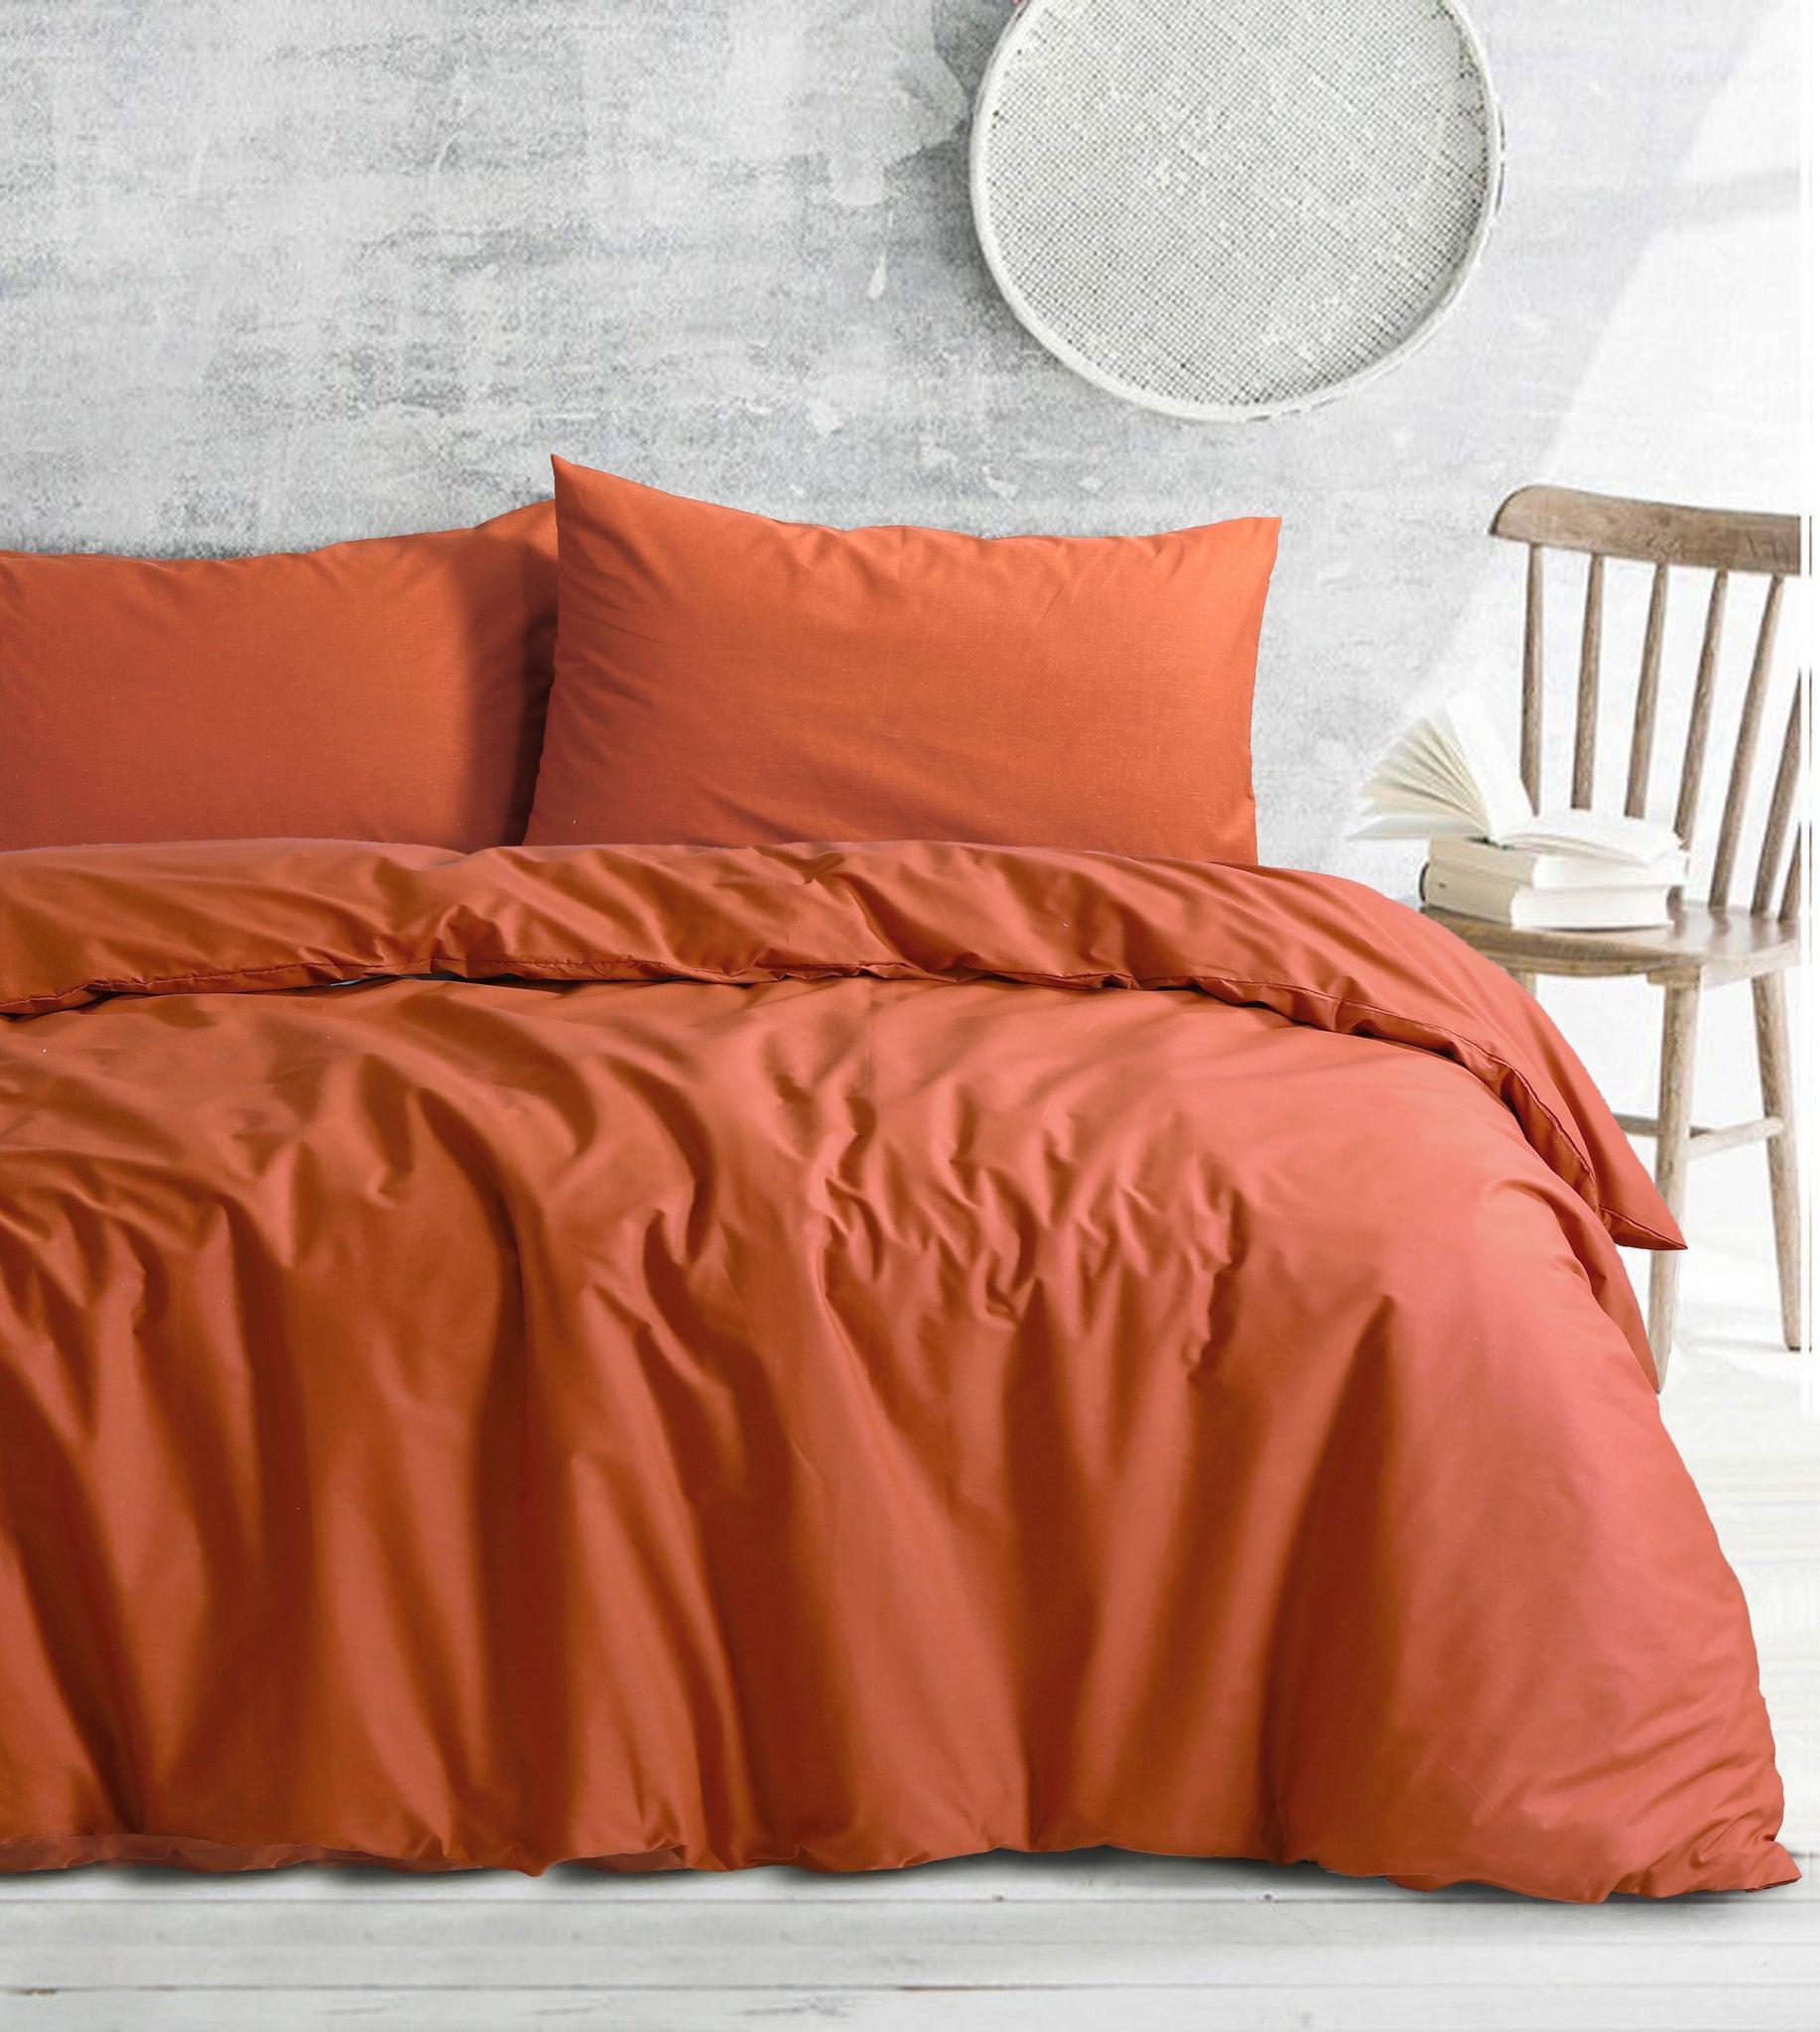 Amsons Royale Cotton Super King Quilt Duvet Doona Cover Set with Europeon pillowcases - Rust